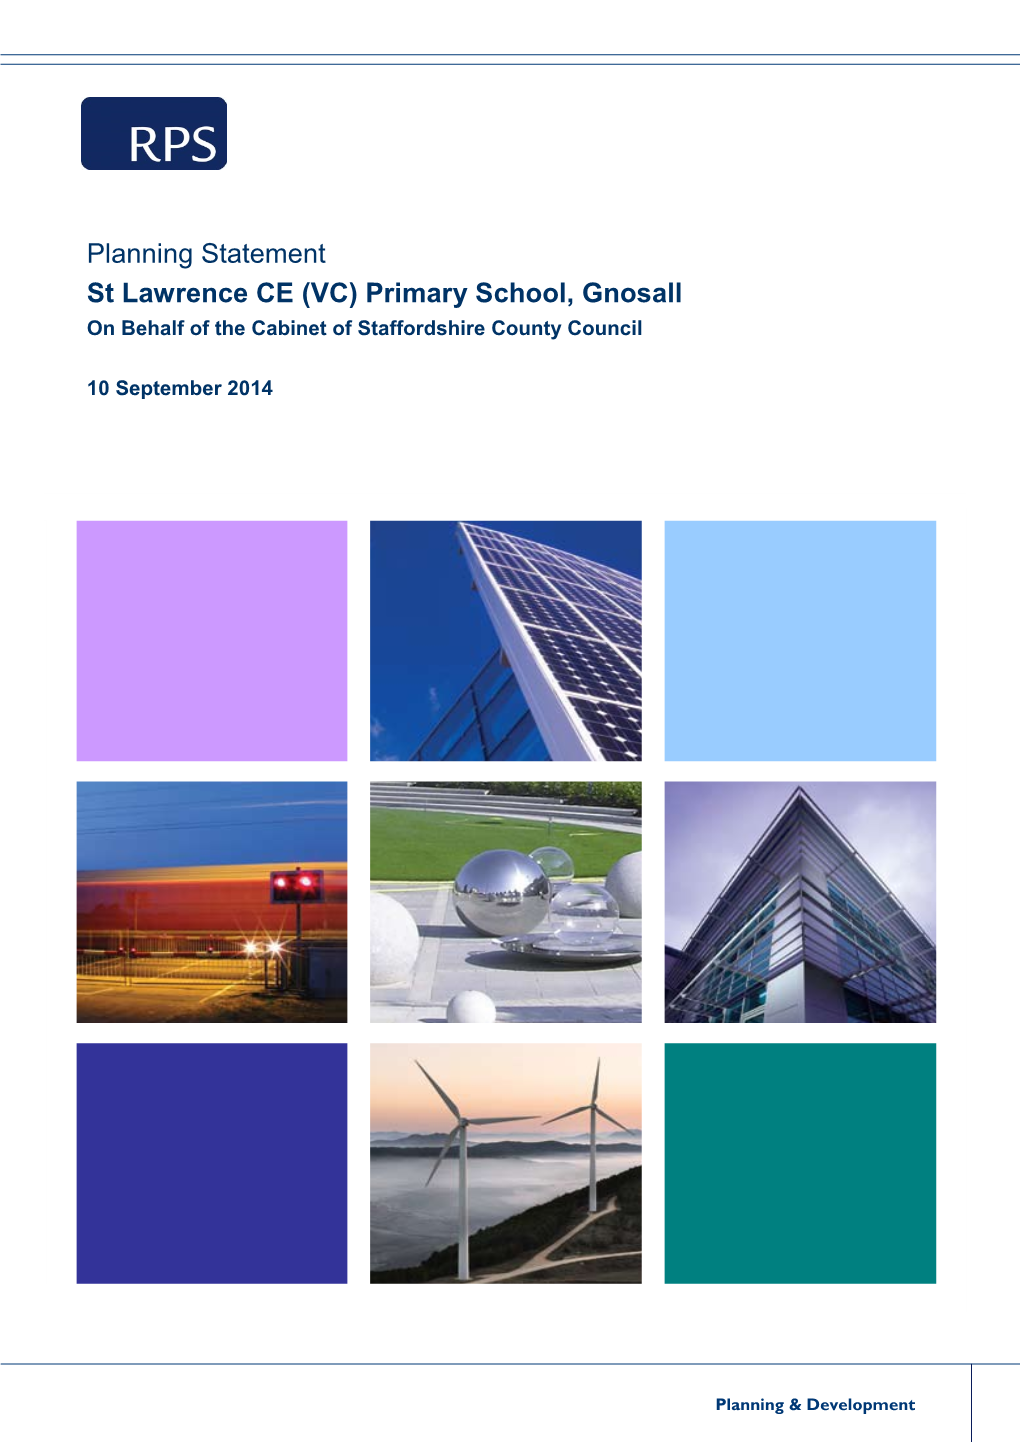 Primary School, Gnosall on Behalf of the Cabinet of Staffordshire County Council